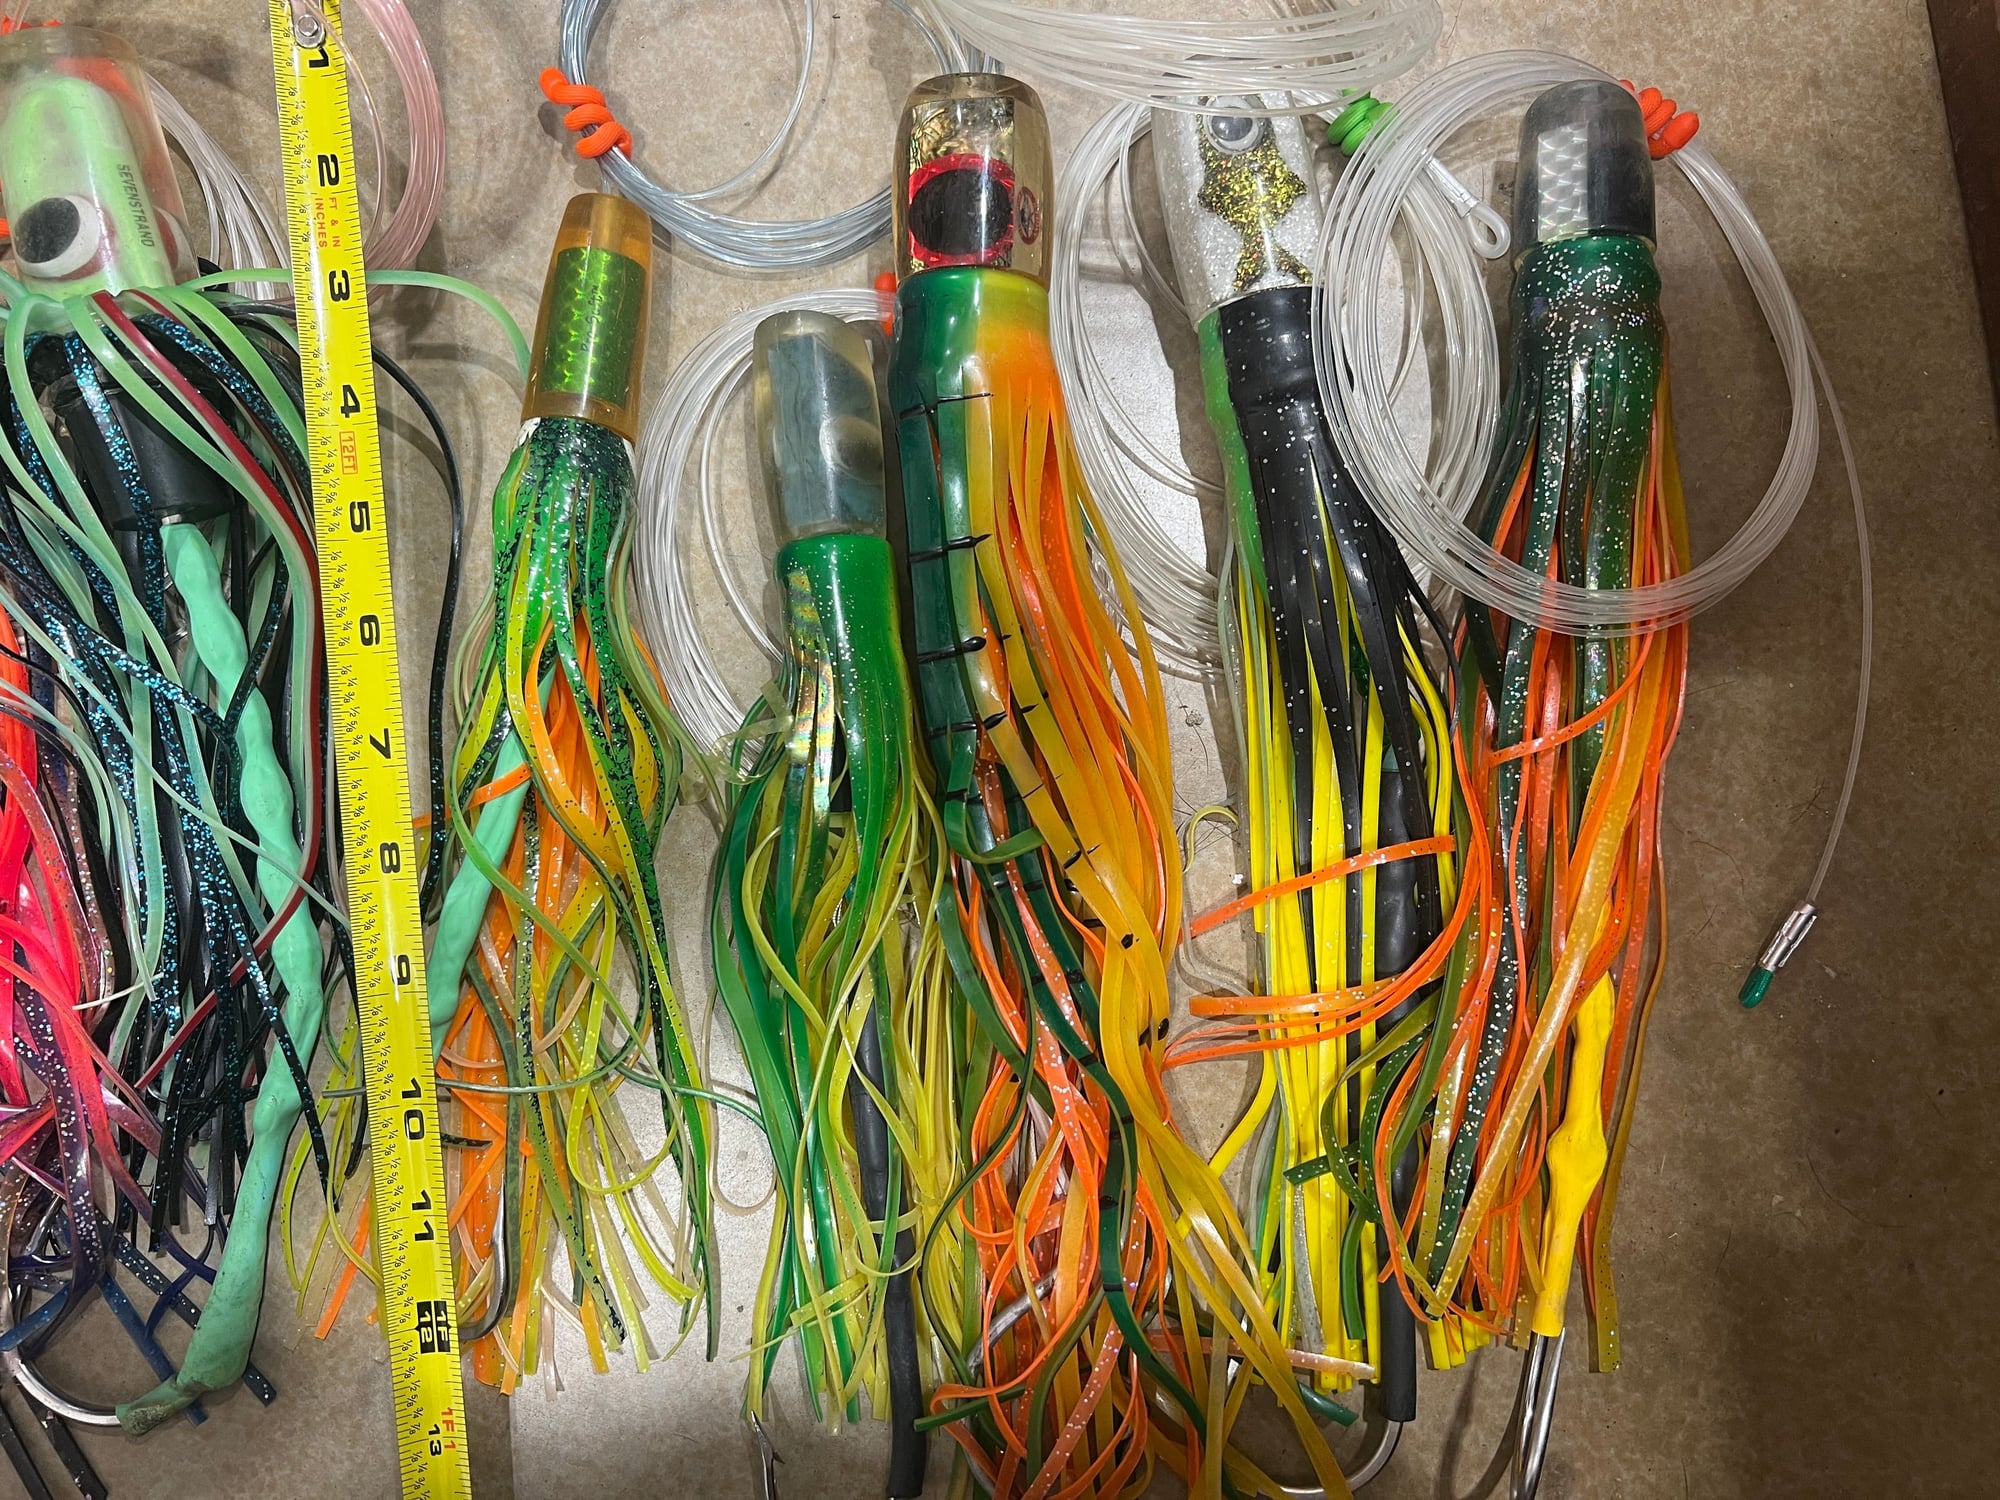 Custom rigged fathom offshore marlin lures - The Hull Truth - Boating and  Fishing Forum